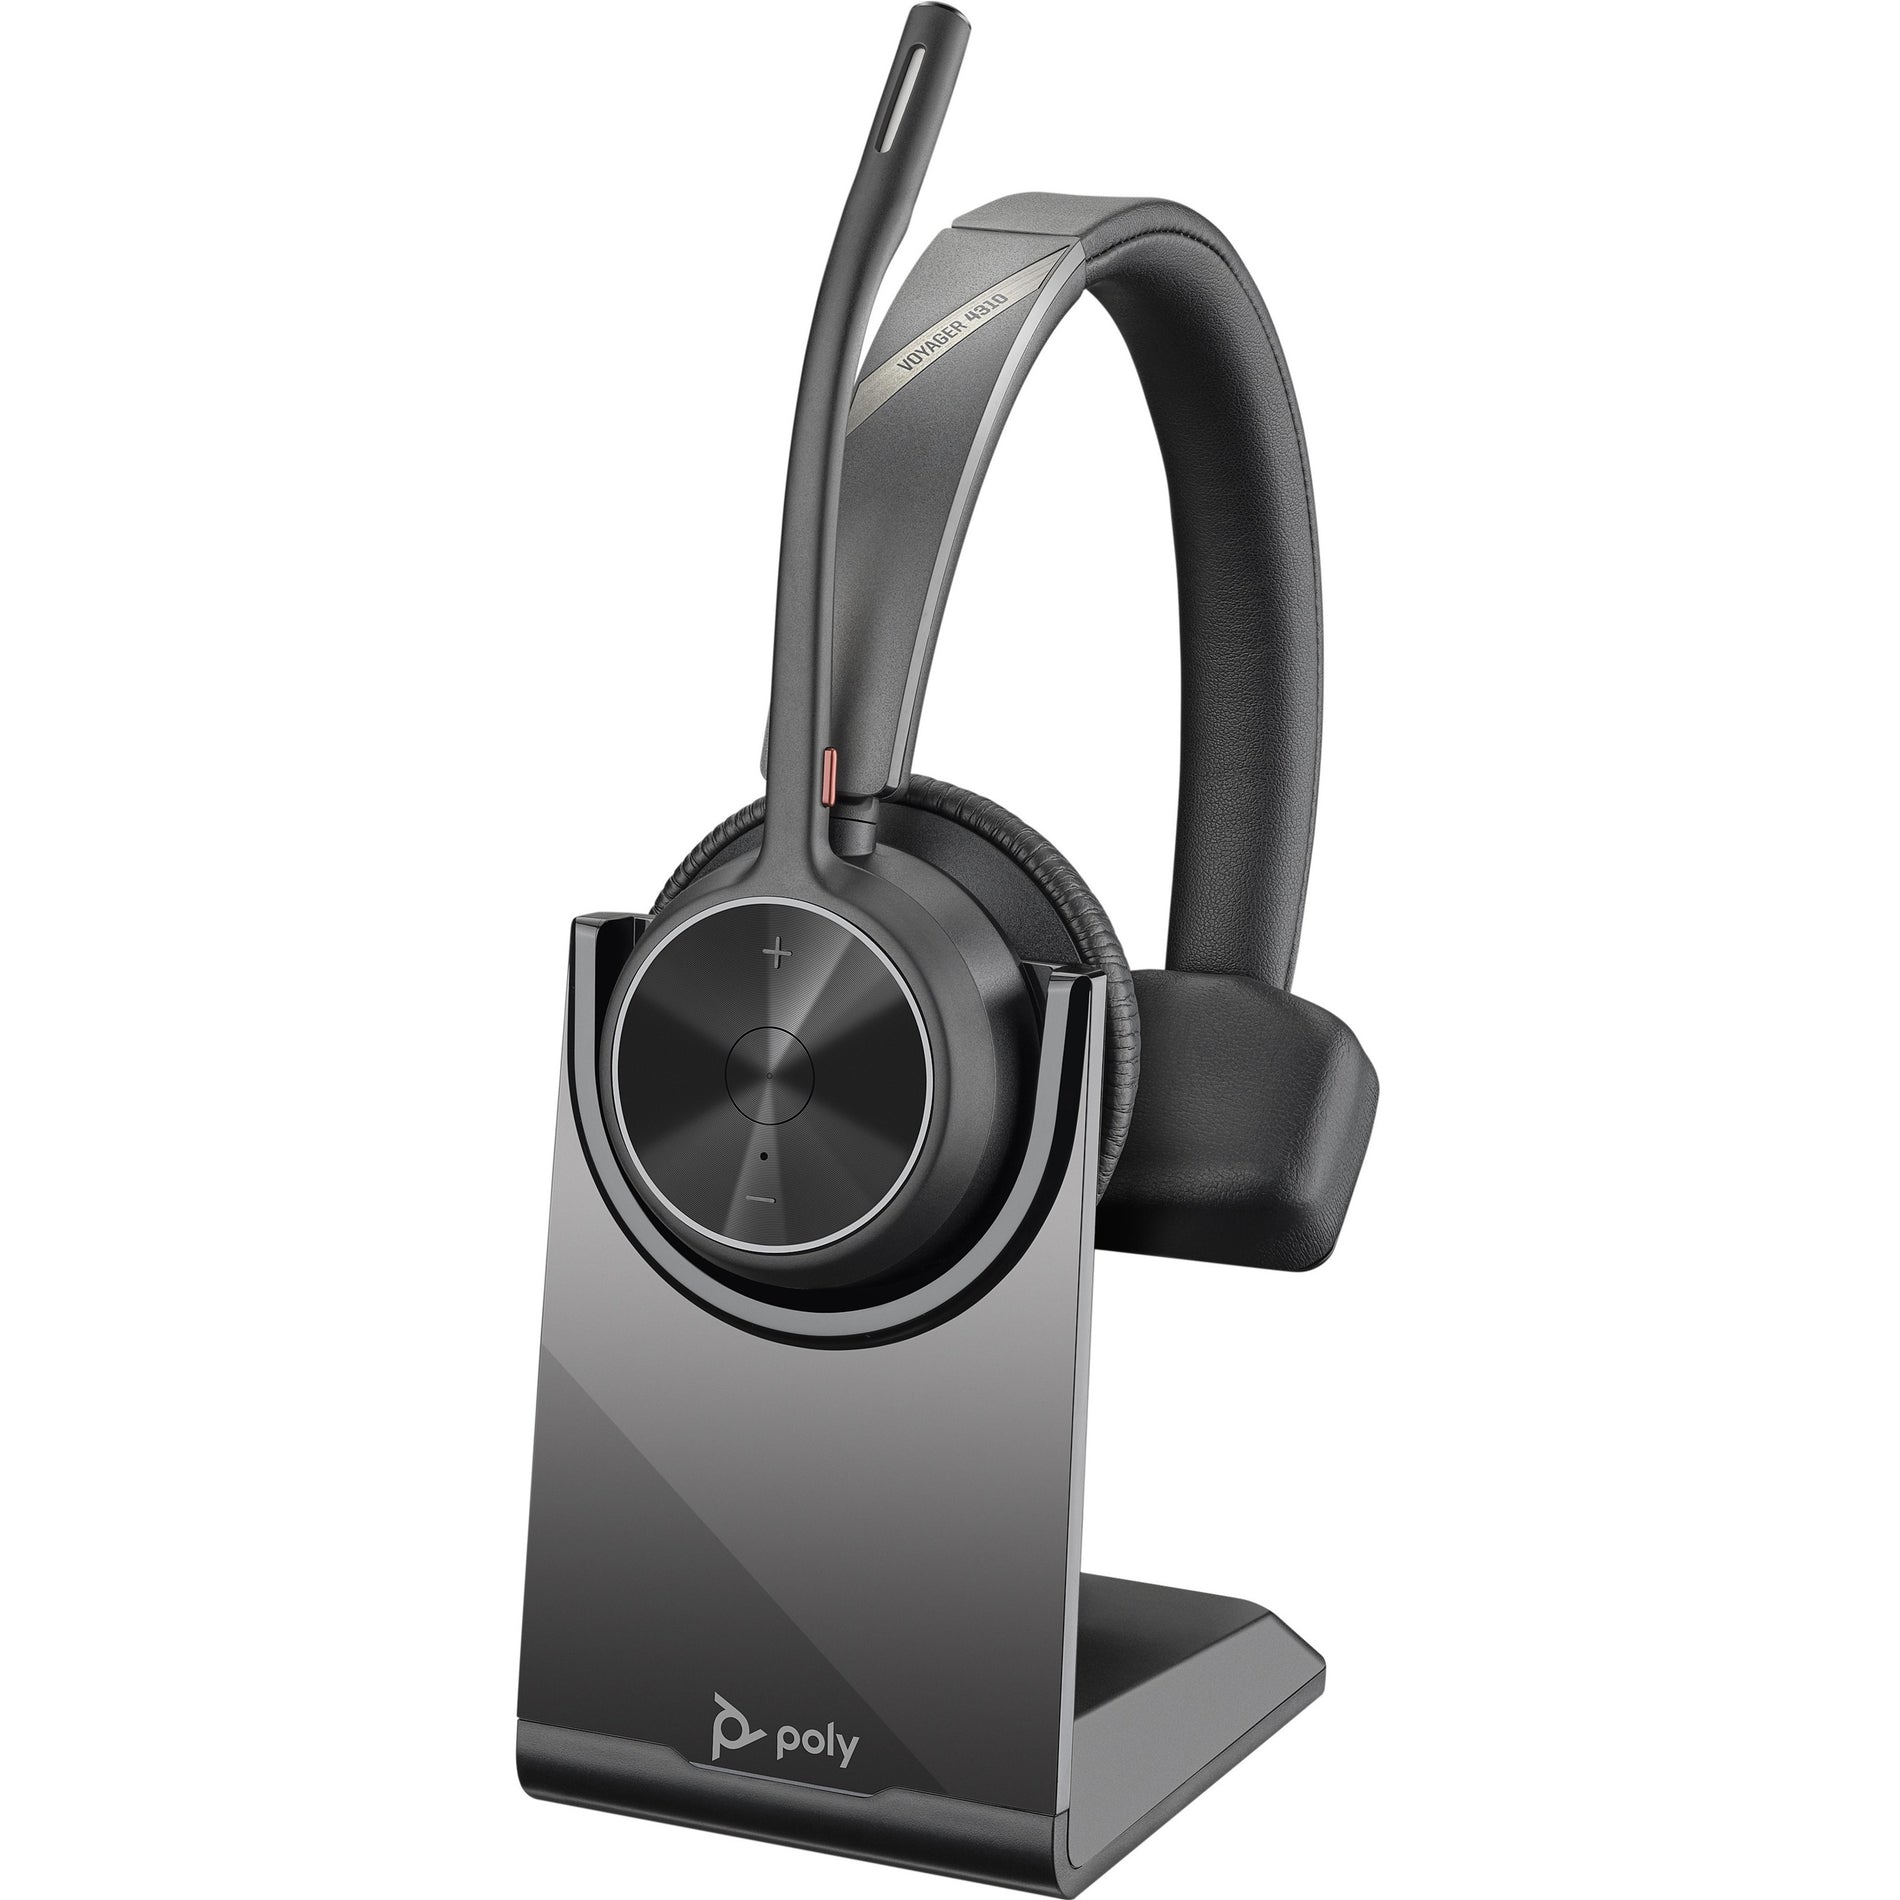 Poly 218474-02 Voyager 4300 UC 4310-M Headset, Mono, Noise Cancelling, USB Type C